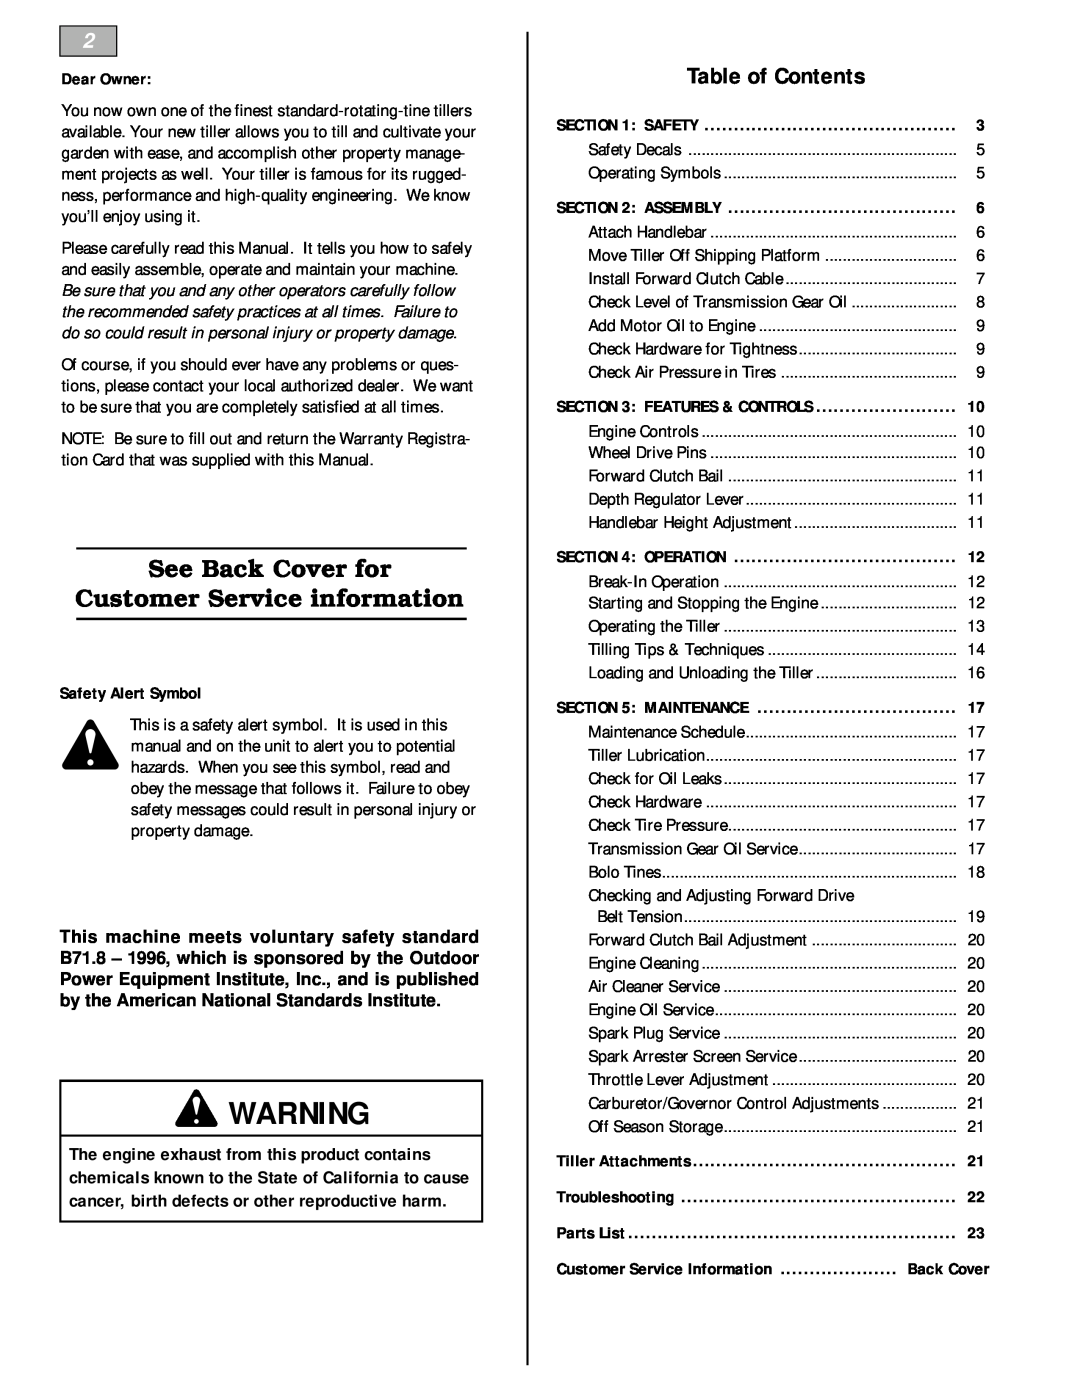 Bolens 12229 Table of Contents, Dear Owner, Safety Alert Symbol, See Back Cover for Customer Service information 